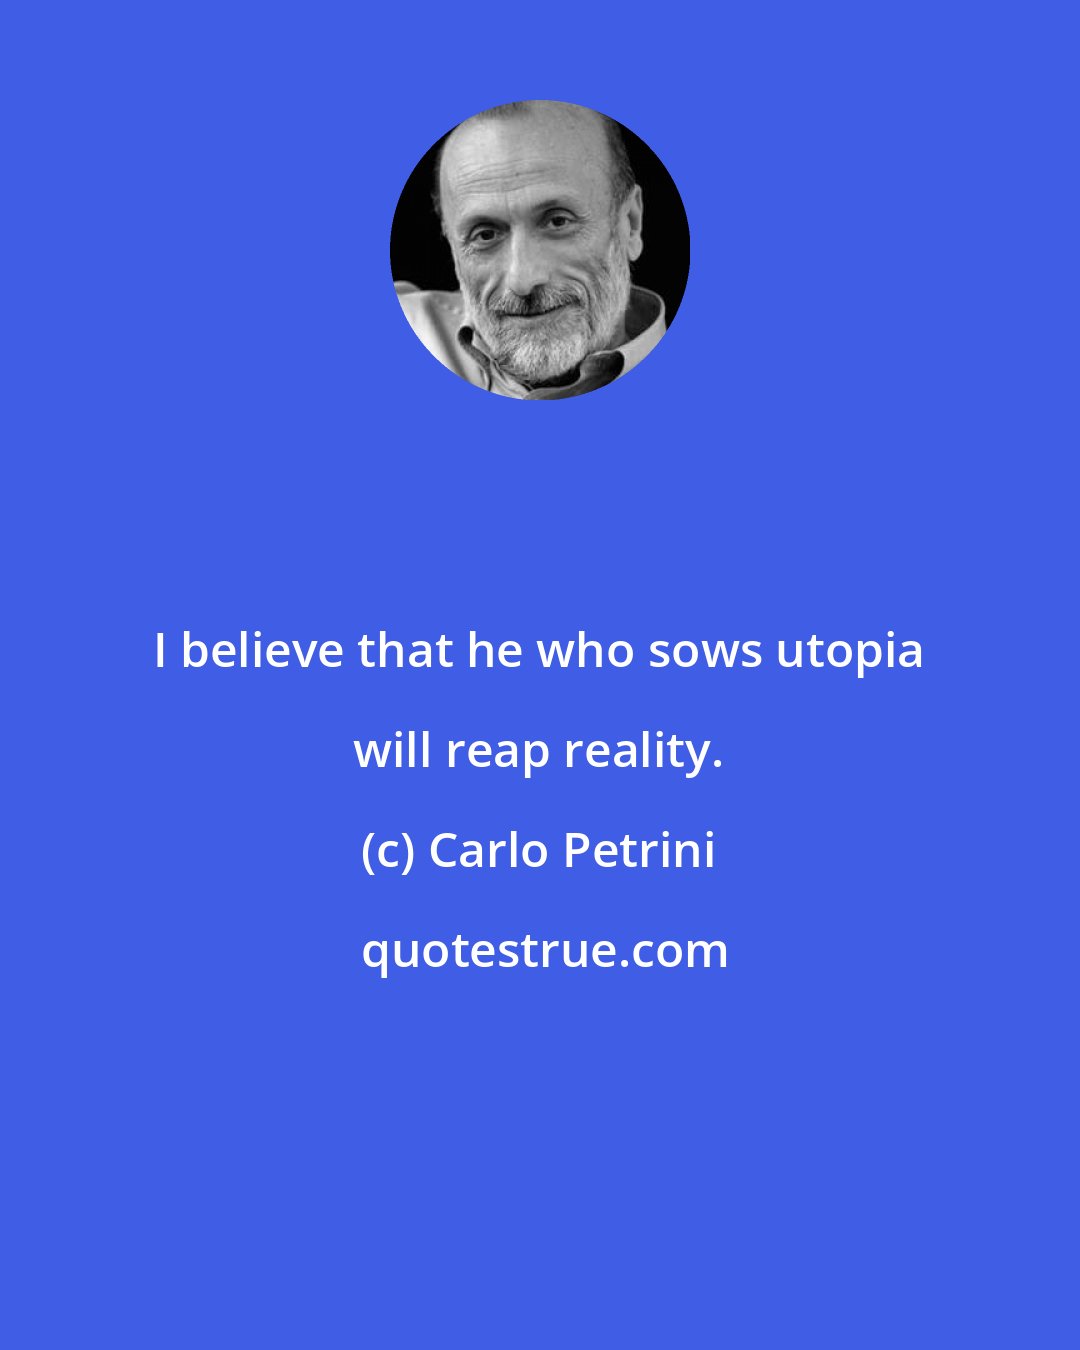 Carlo Petrini: I believe that he who sows utopia will reap reality.